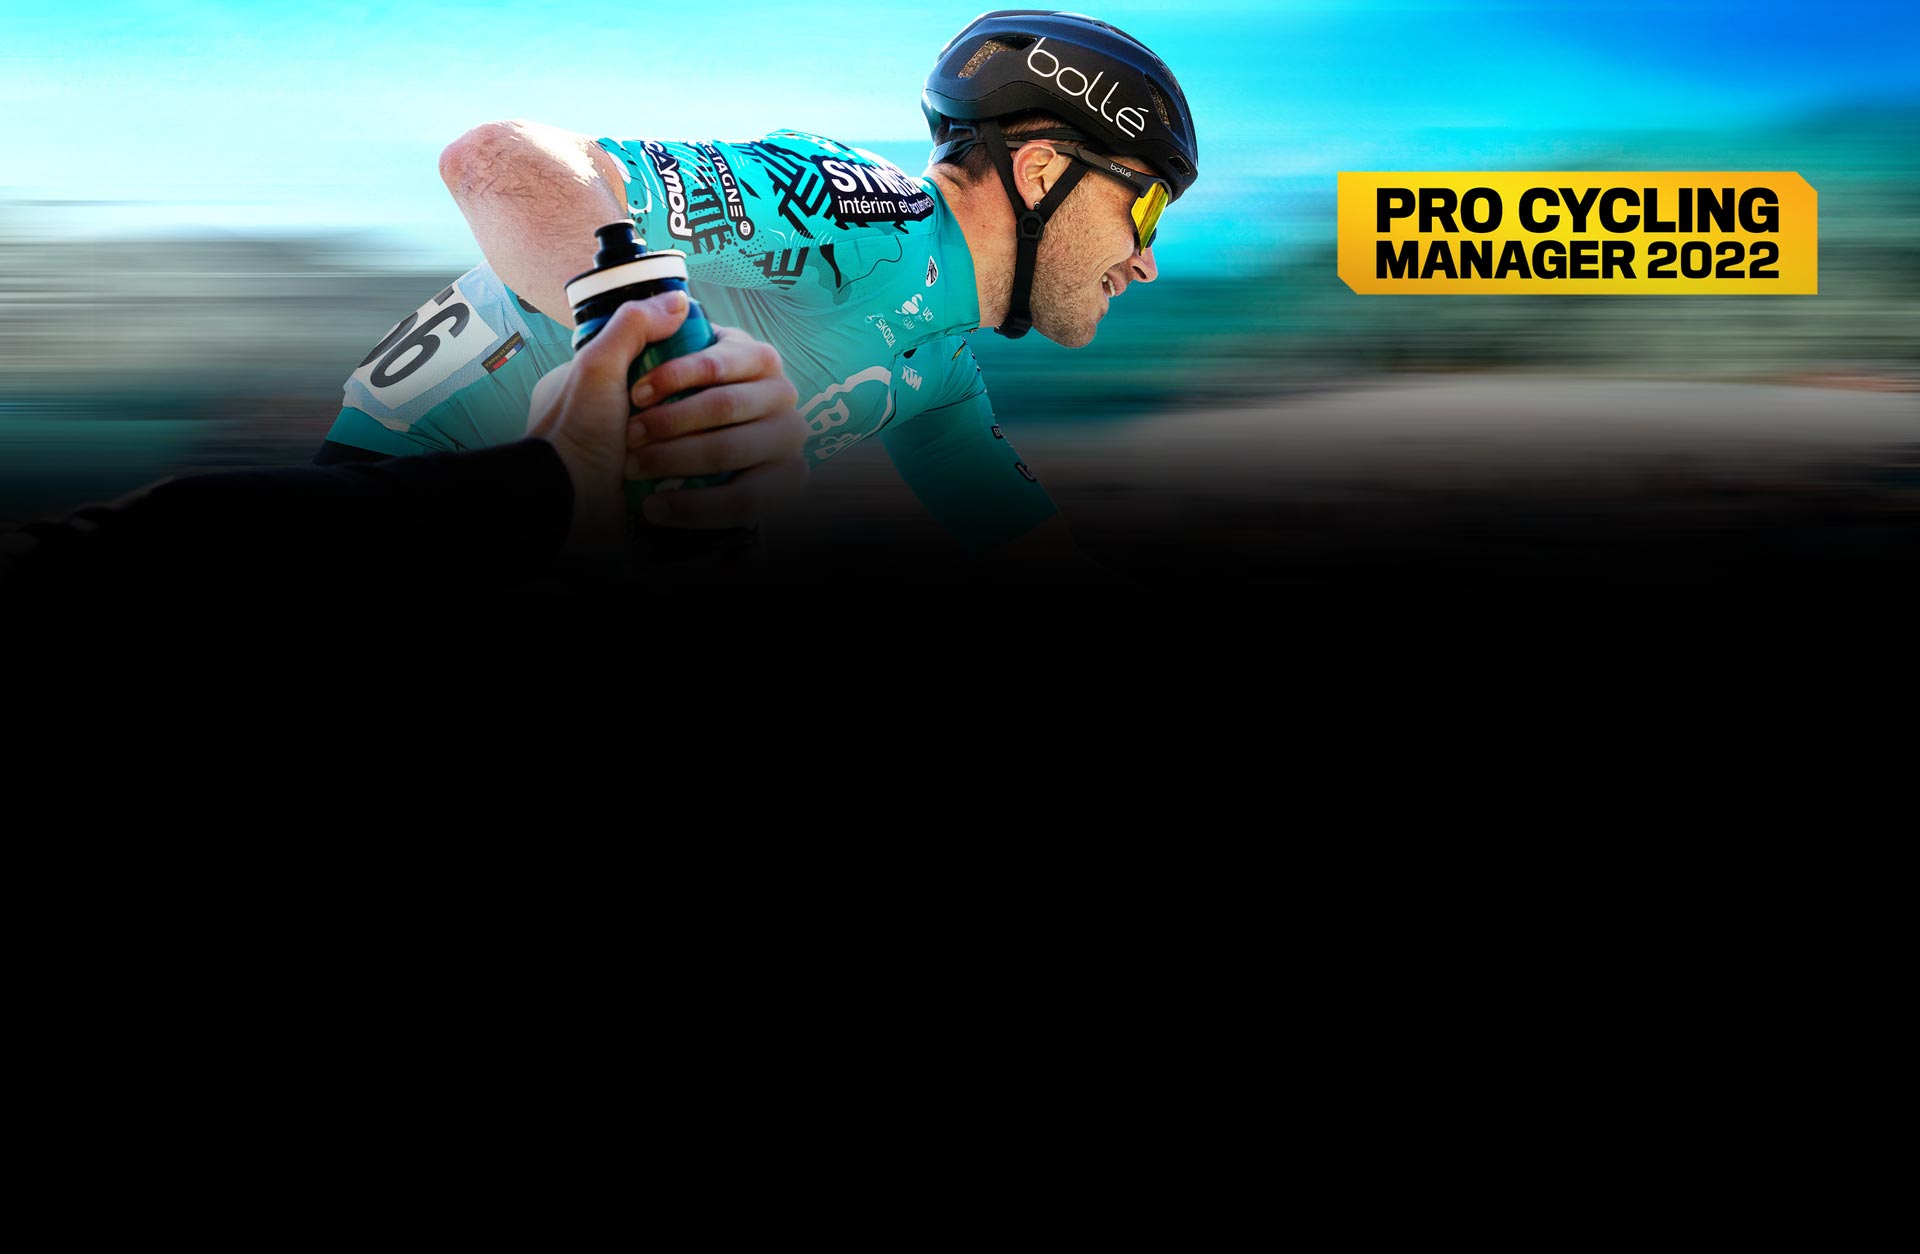 Buy Pro Cycling Manager 2022 on GAMESLOAD